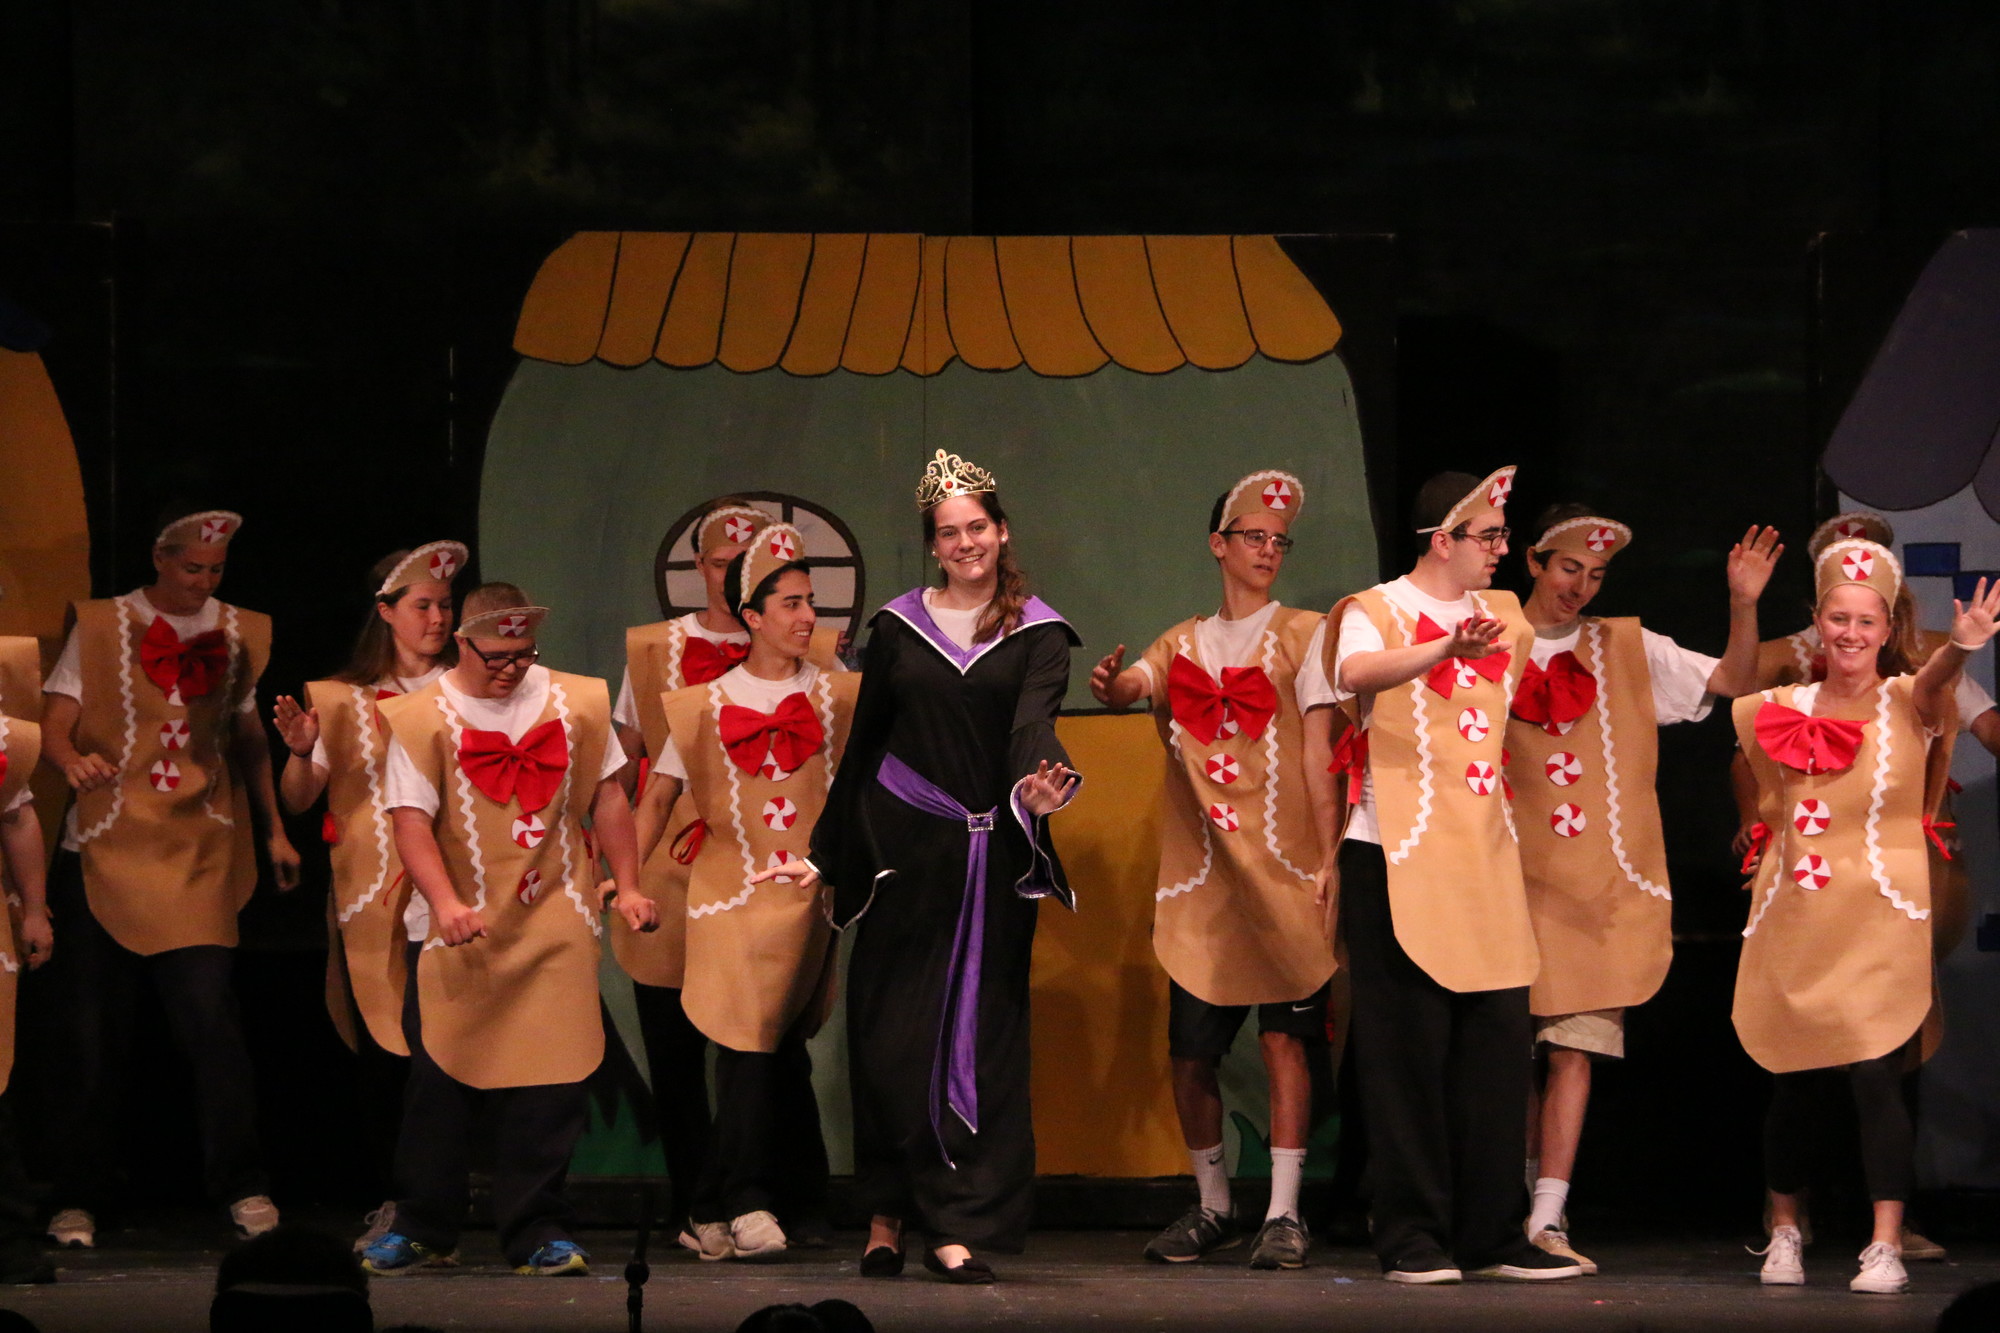 The evil Witch, played by Brigid Farrell, center, with her group of gingerbread people. From left are John O’Brien, Allie Barry, Connor Barry, Ryan Coughlin, Chris Chiechi, Campion Quinn, Alex Stamboulidis and Megan Harkins.